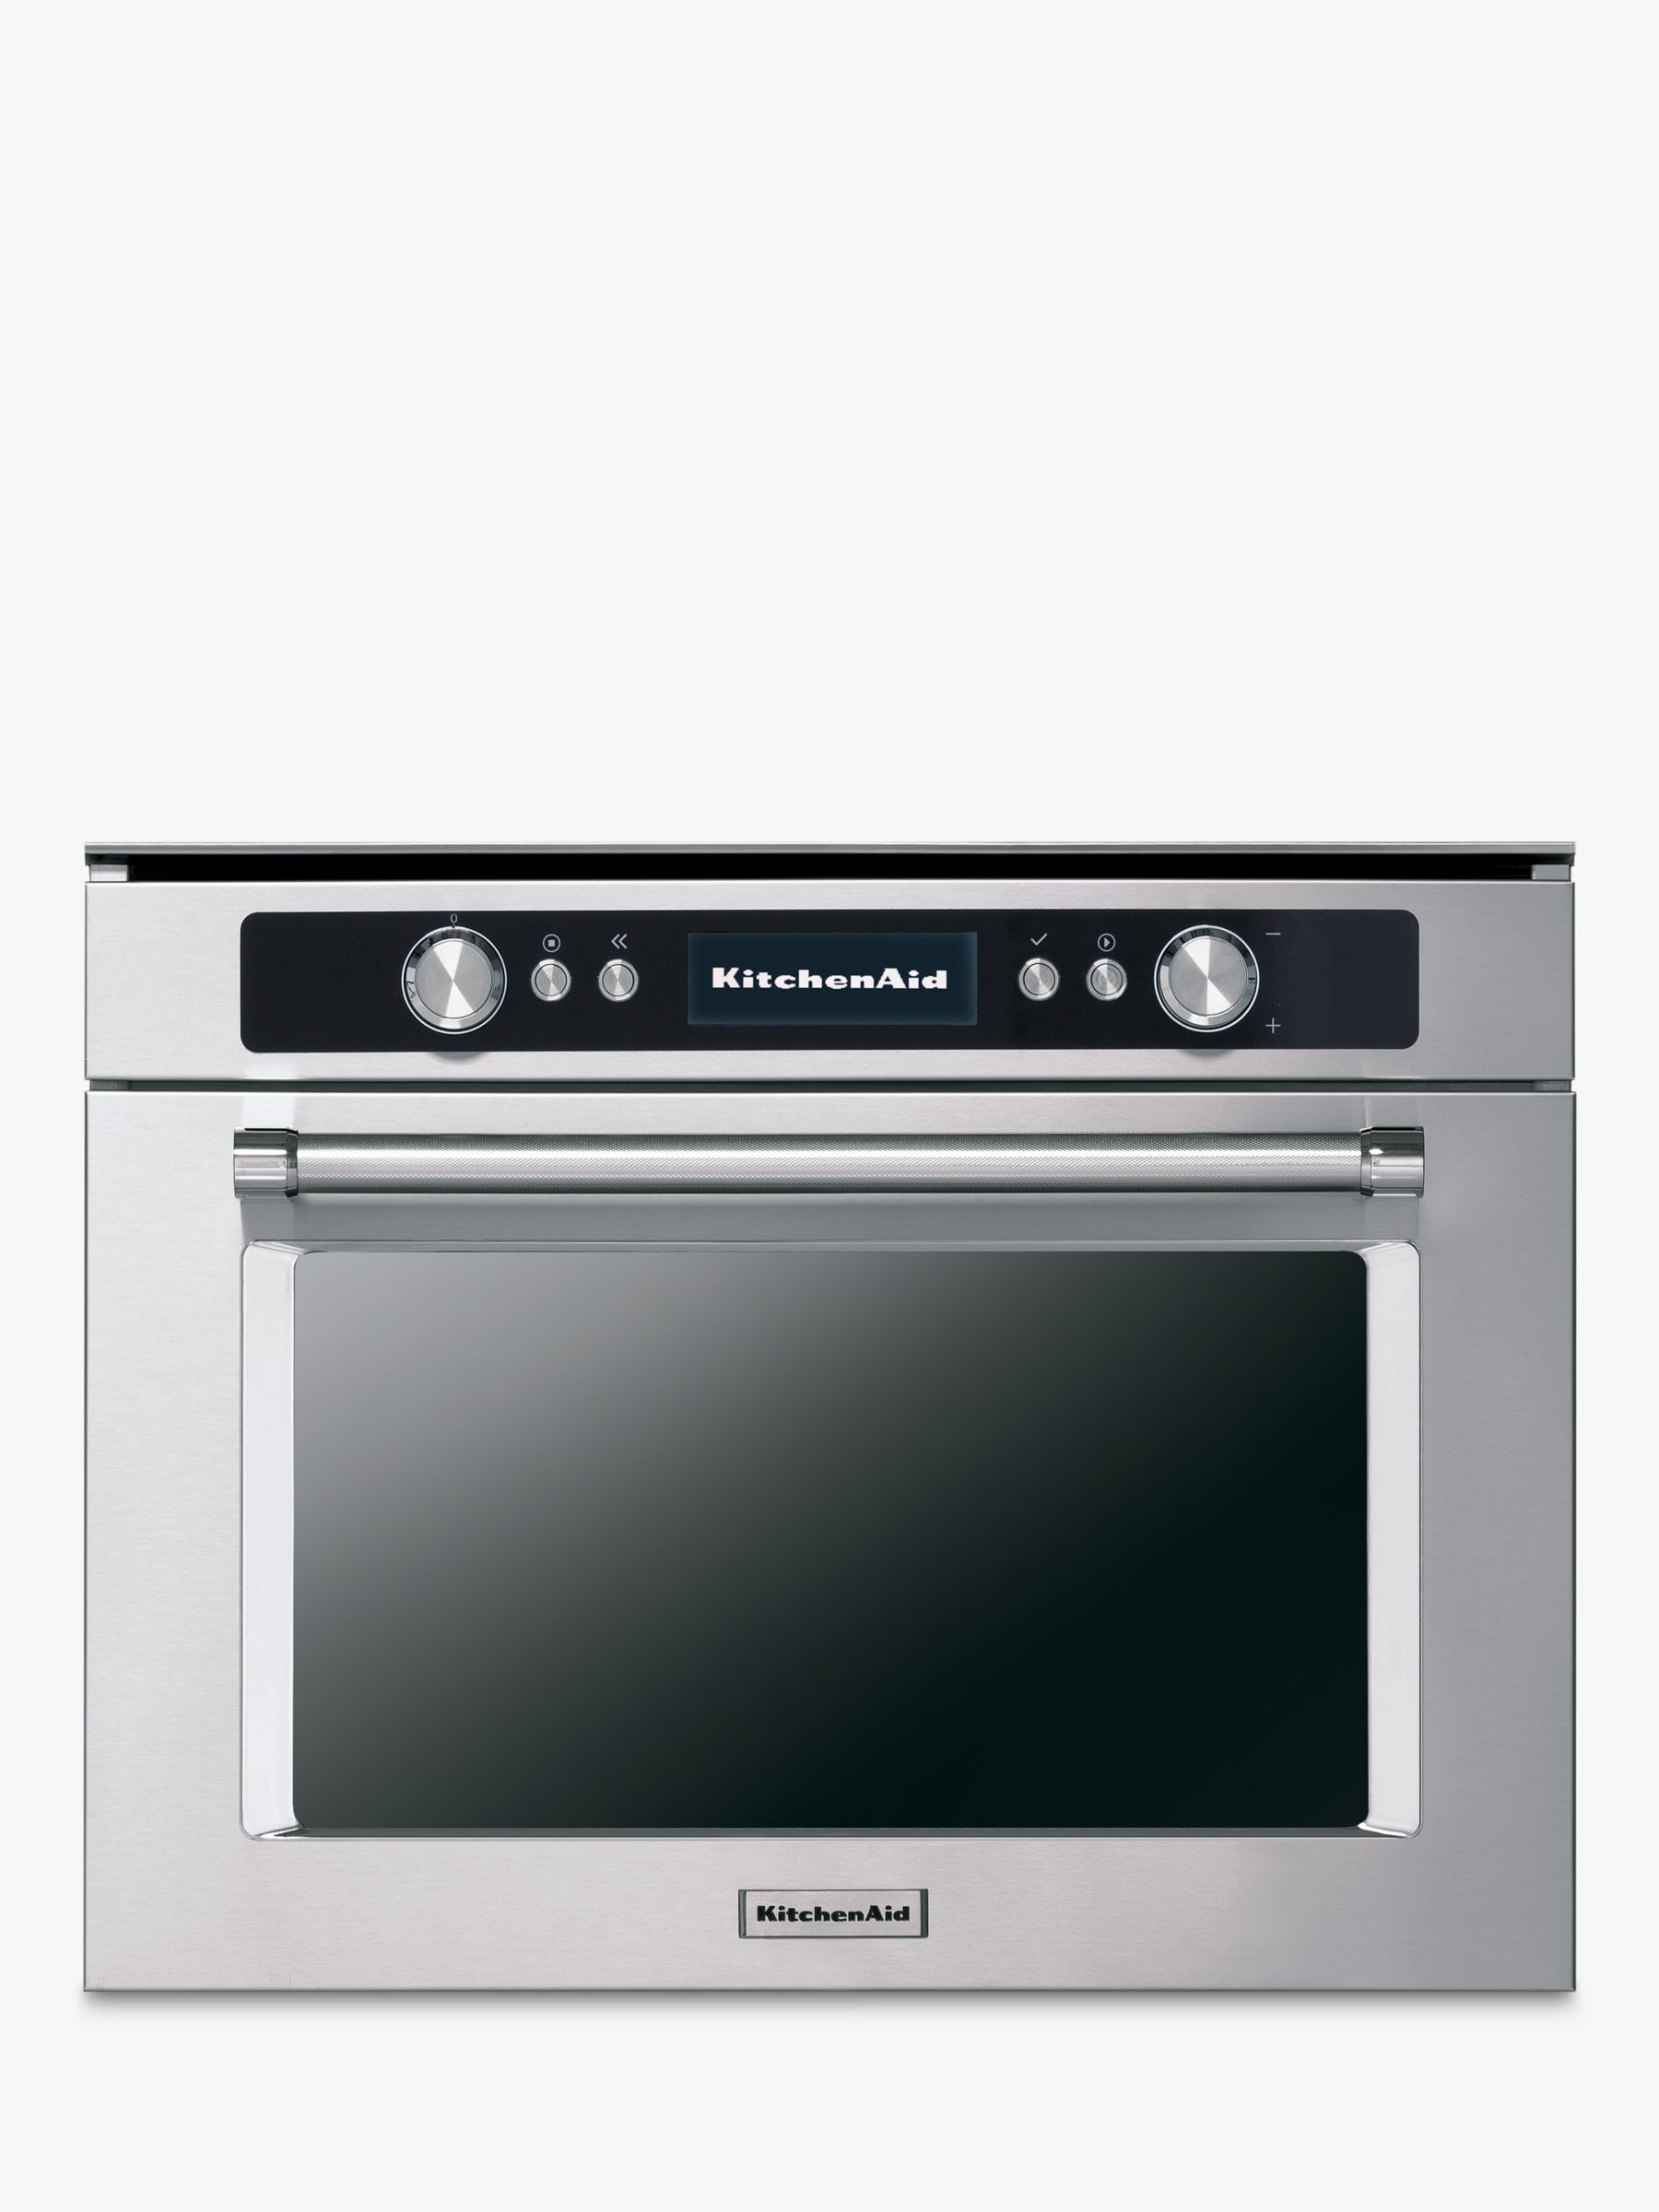 KitchenAid KMQCX45600 Built-in Multifunction Microwave Oven review